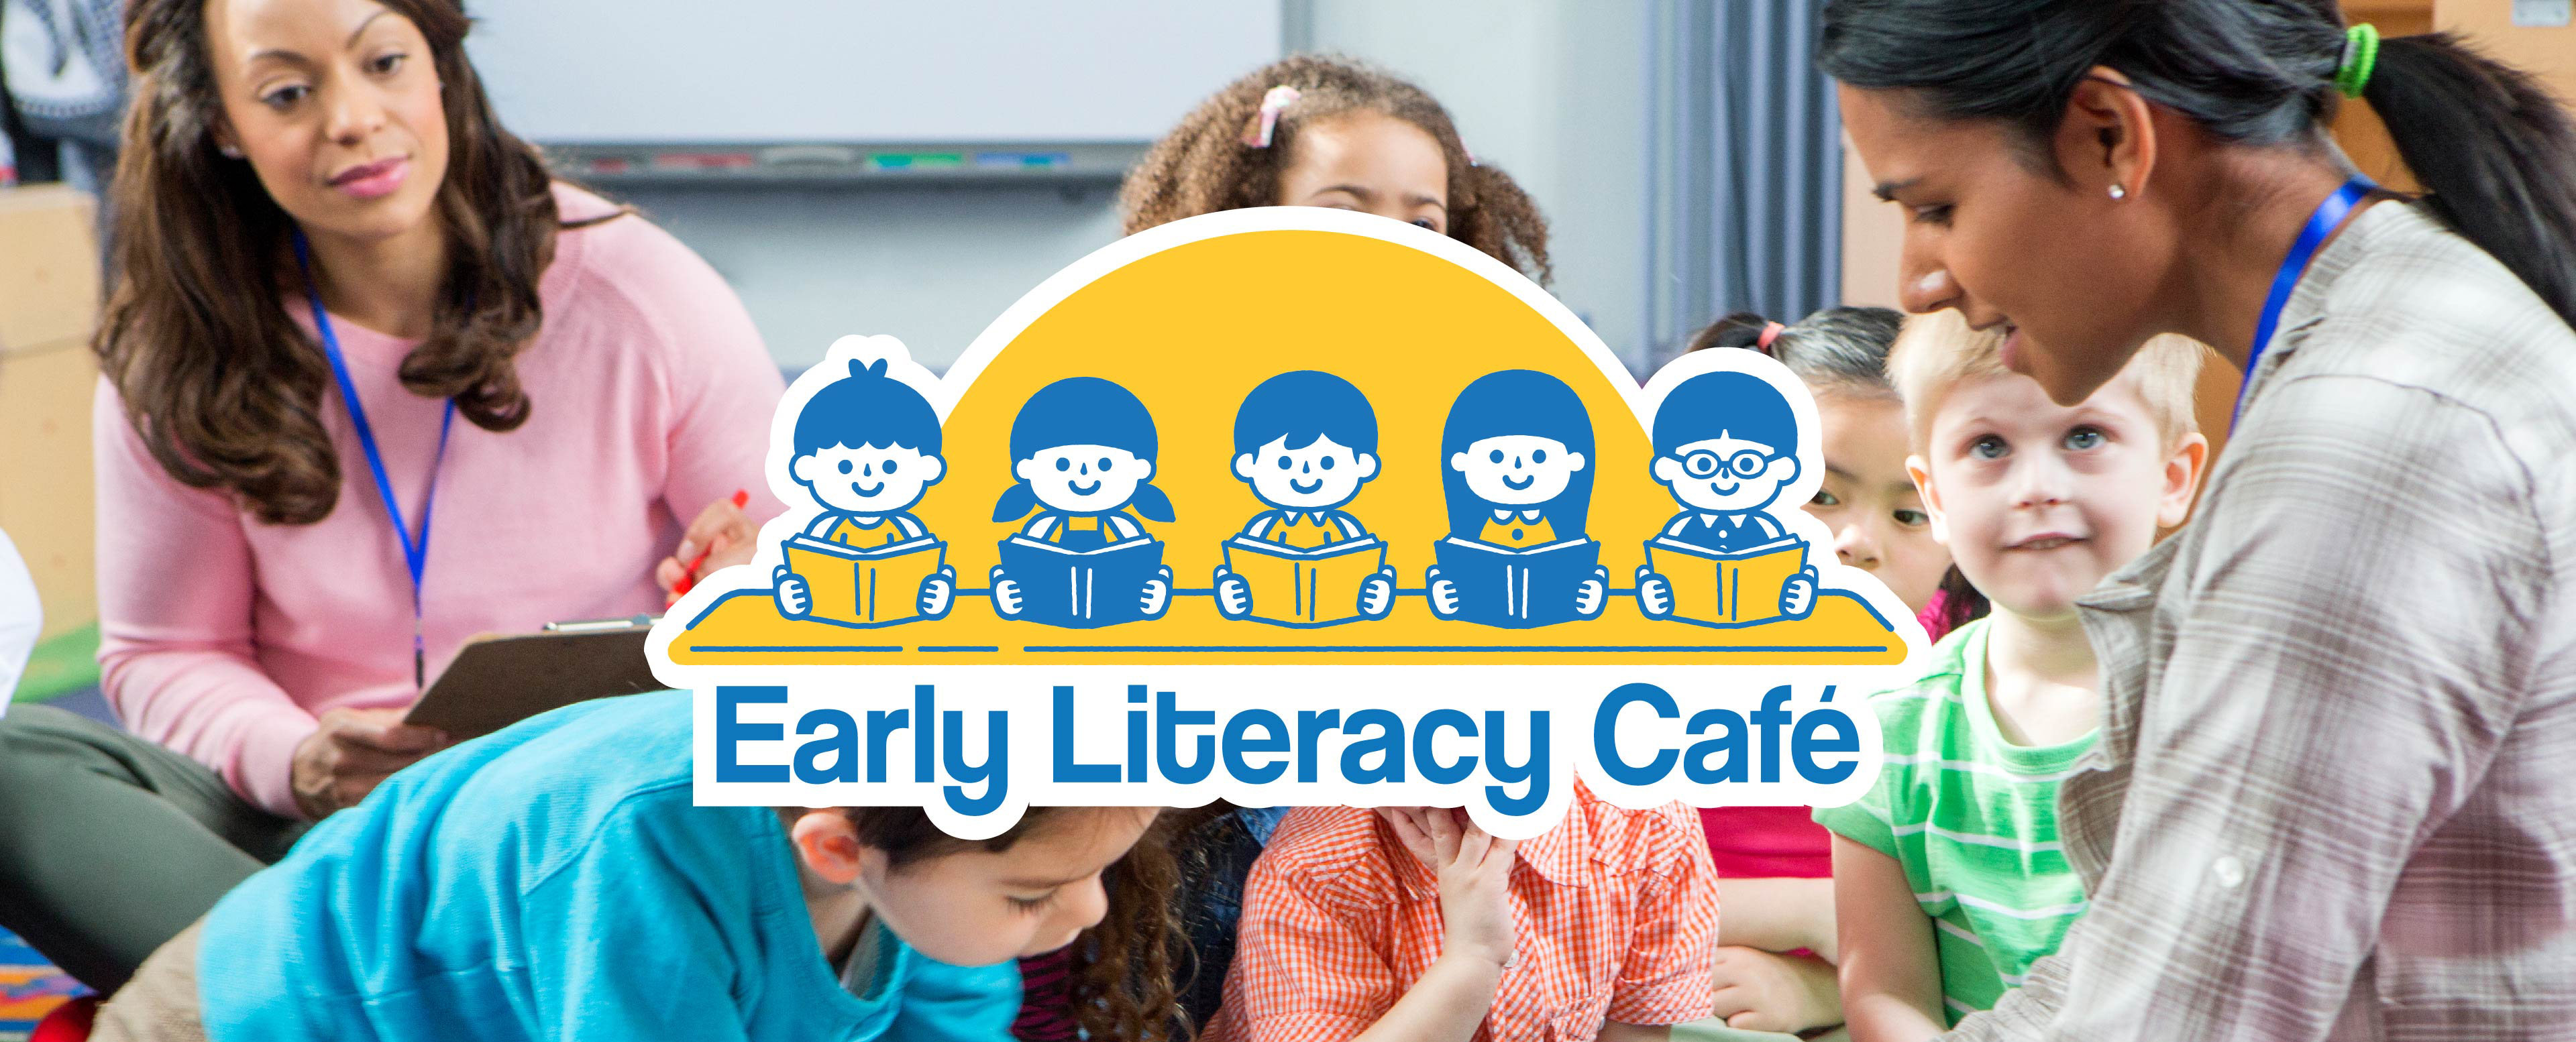 Early Literacy Cafe